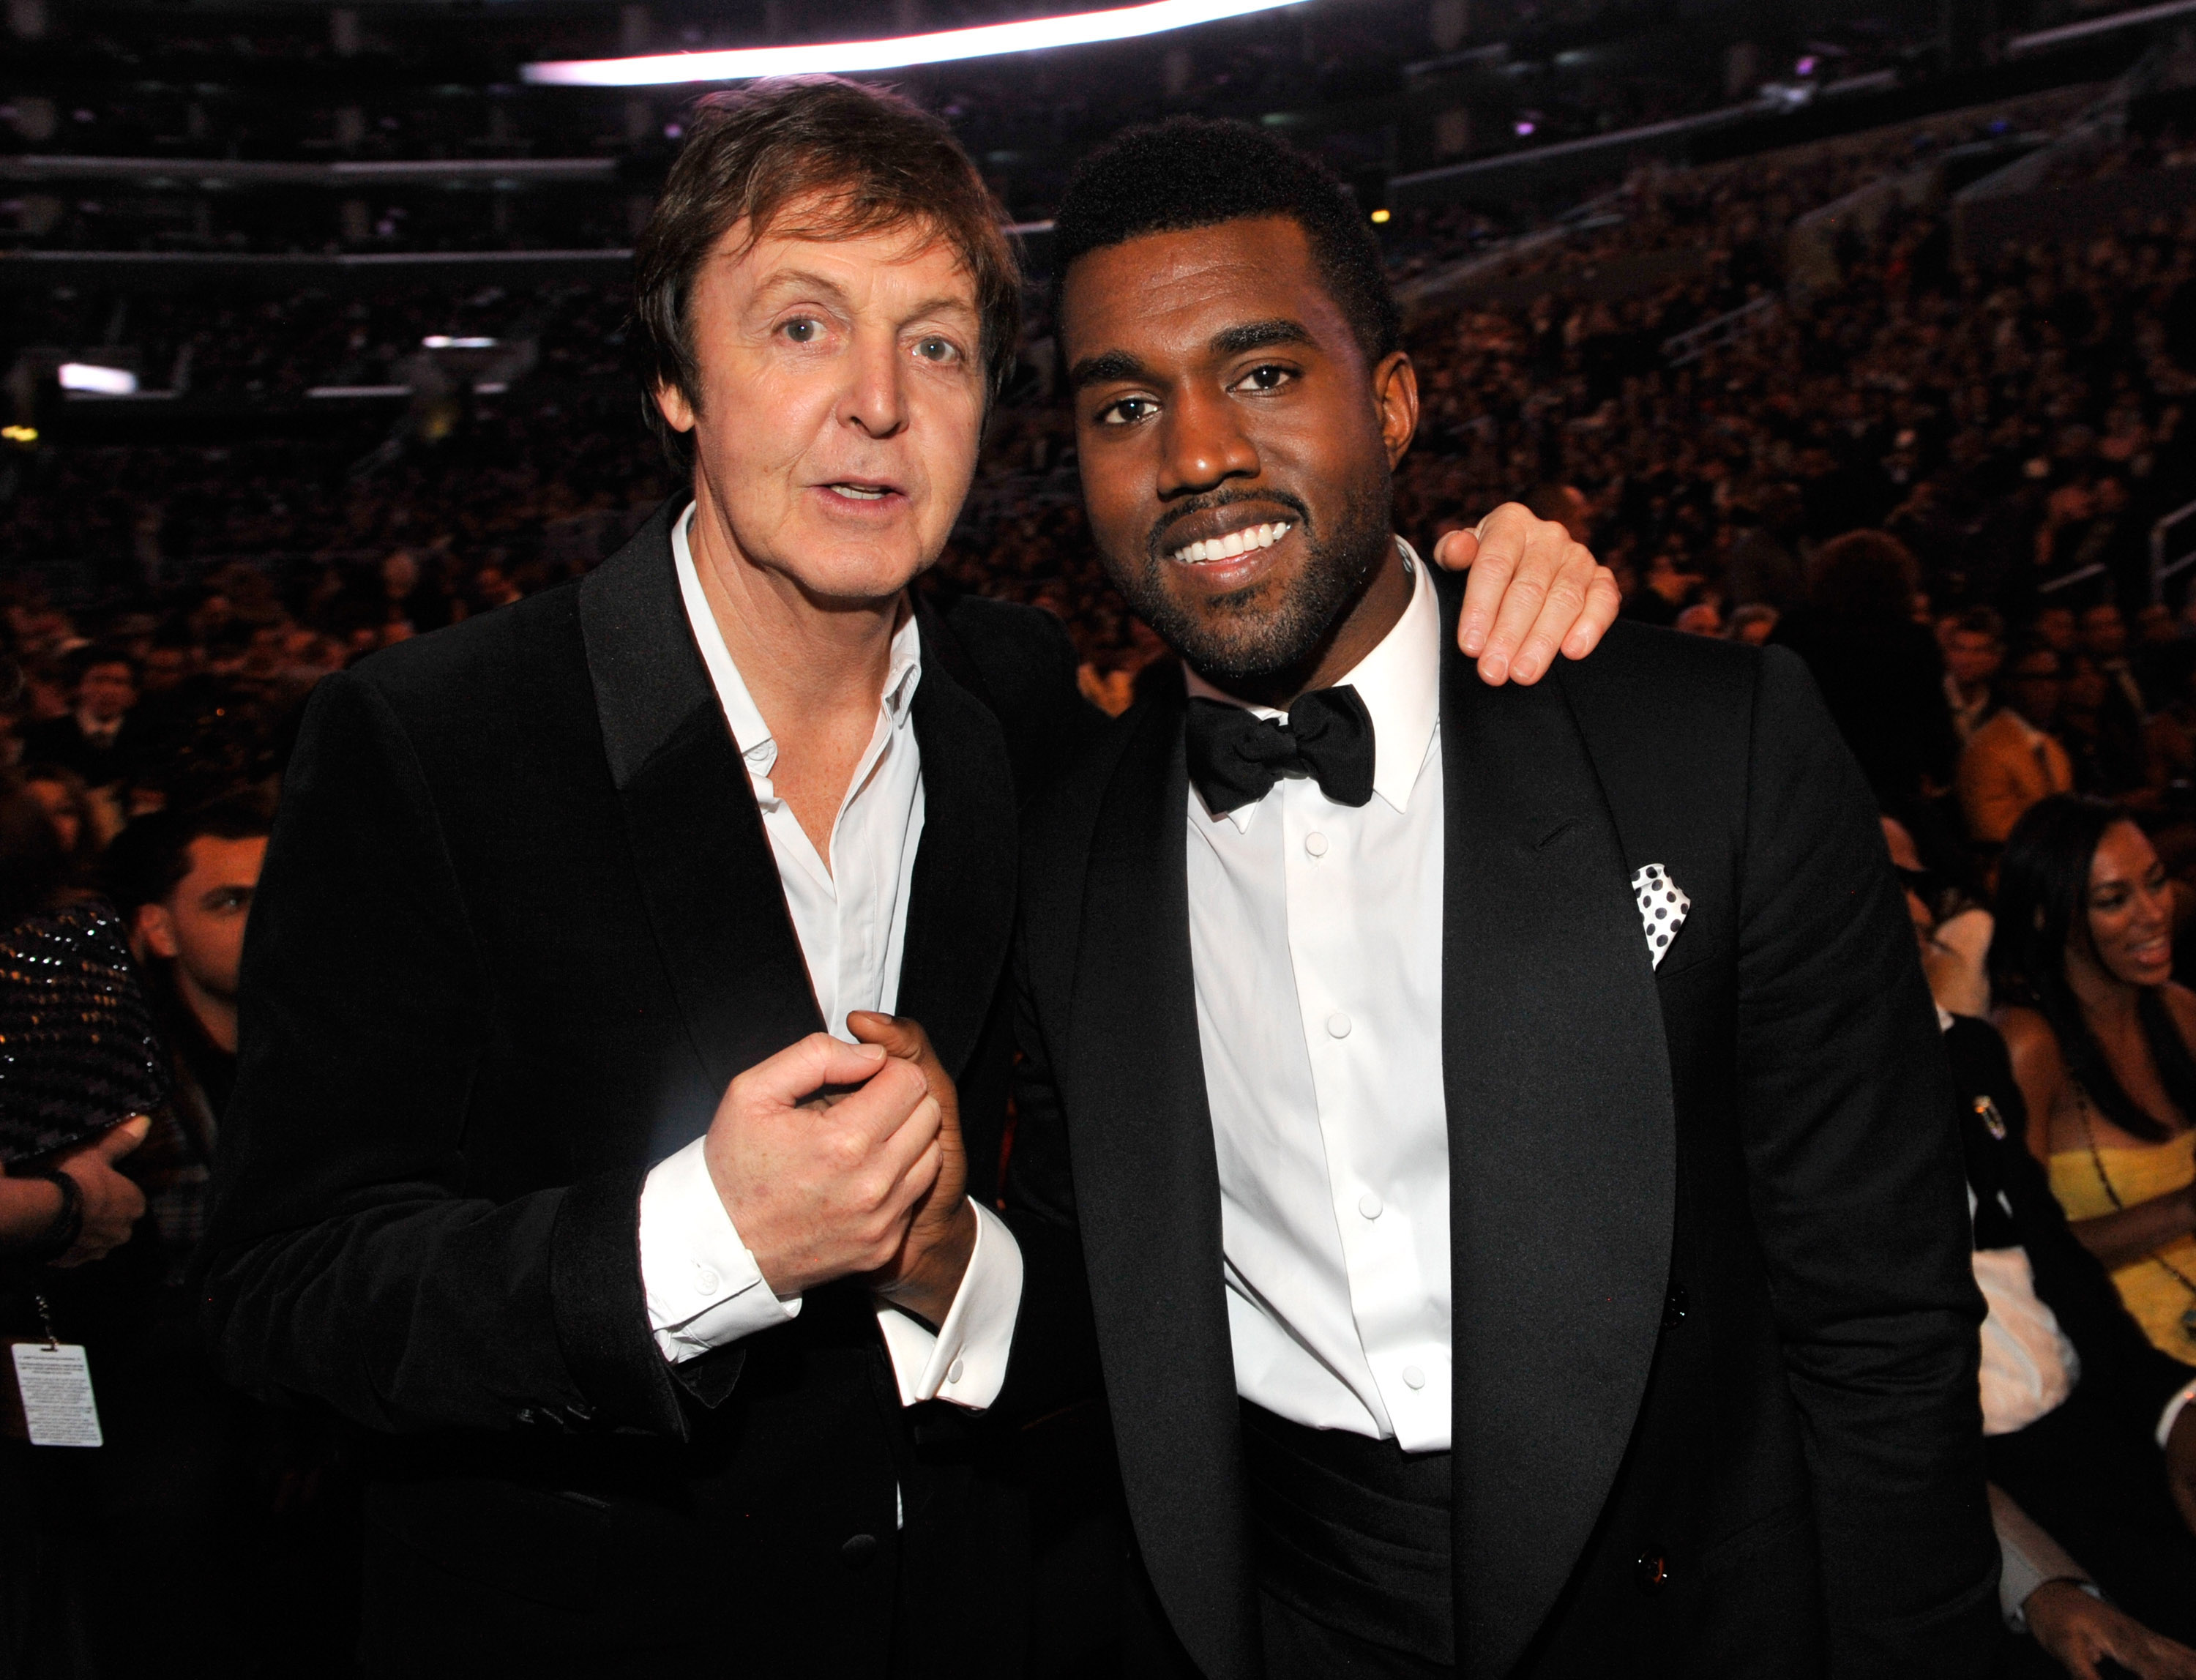 Paul McCartney and Kanye West wearing suits